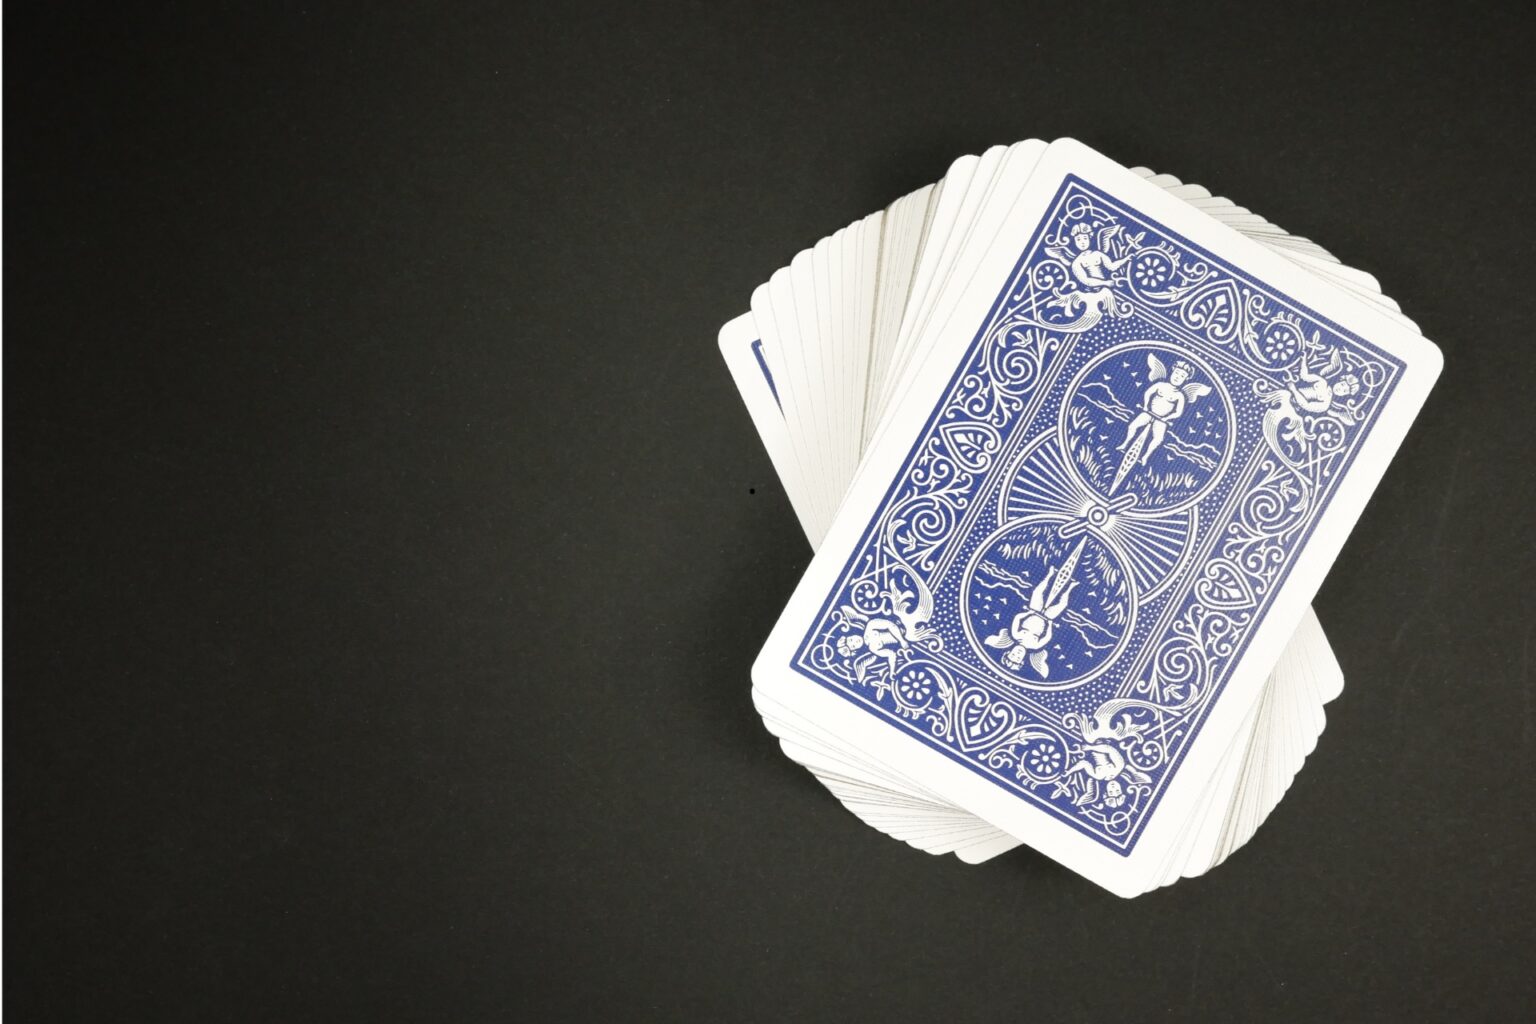 A card deck ready to play Crazy Eight